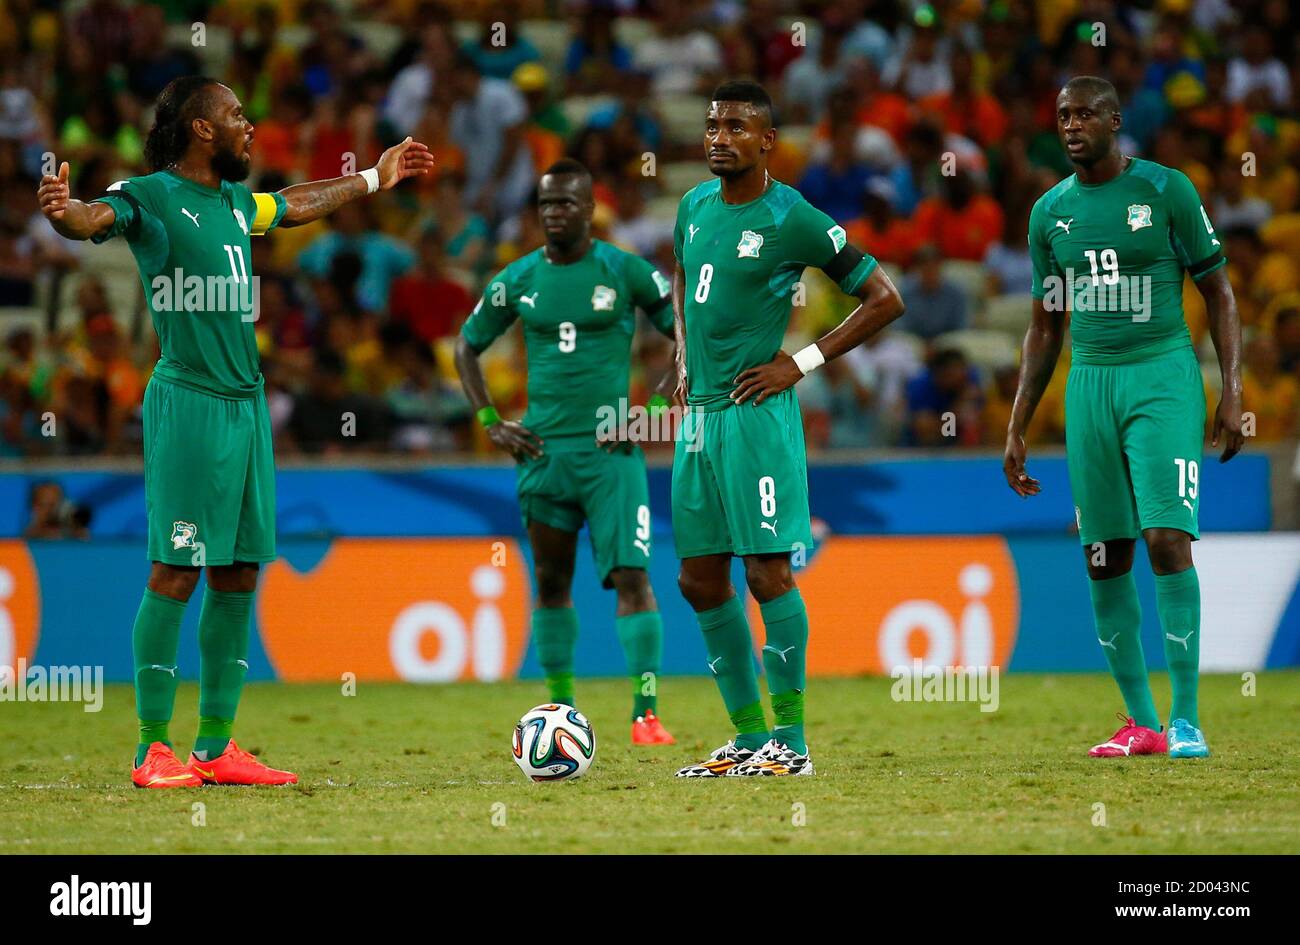 Ivory Coast's Didier Drogba reacts with his teammates (L-R) Cheick Tiote,  Salomon Kalou and Yaya Toure after their team conceded a goal to Greece  during their 2014 World Cup Group C soccer